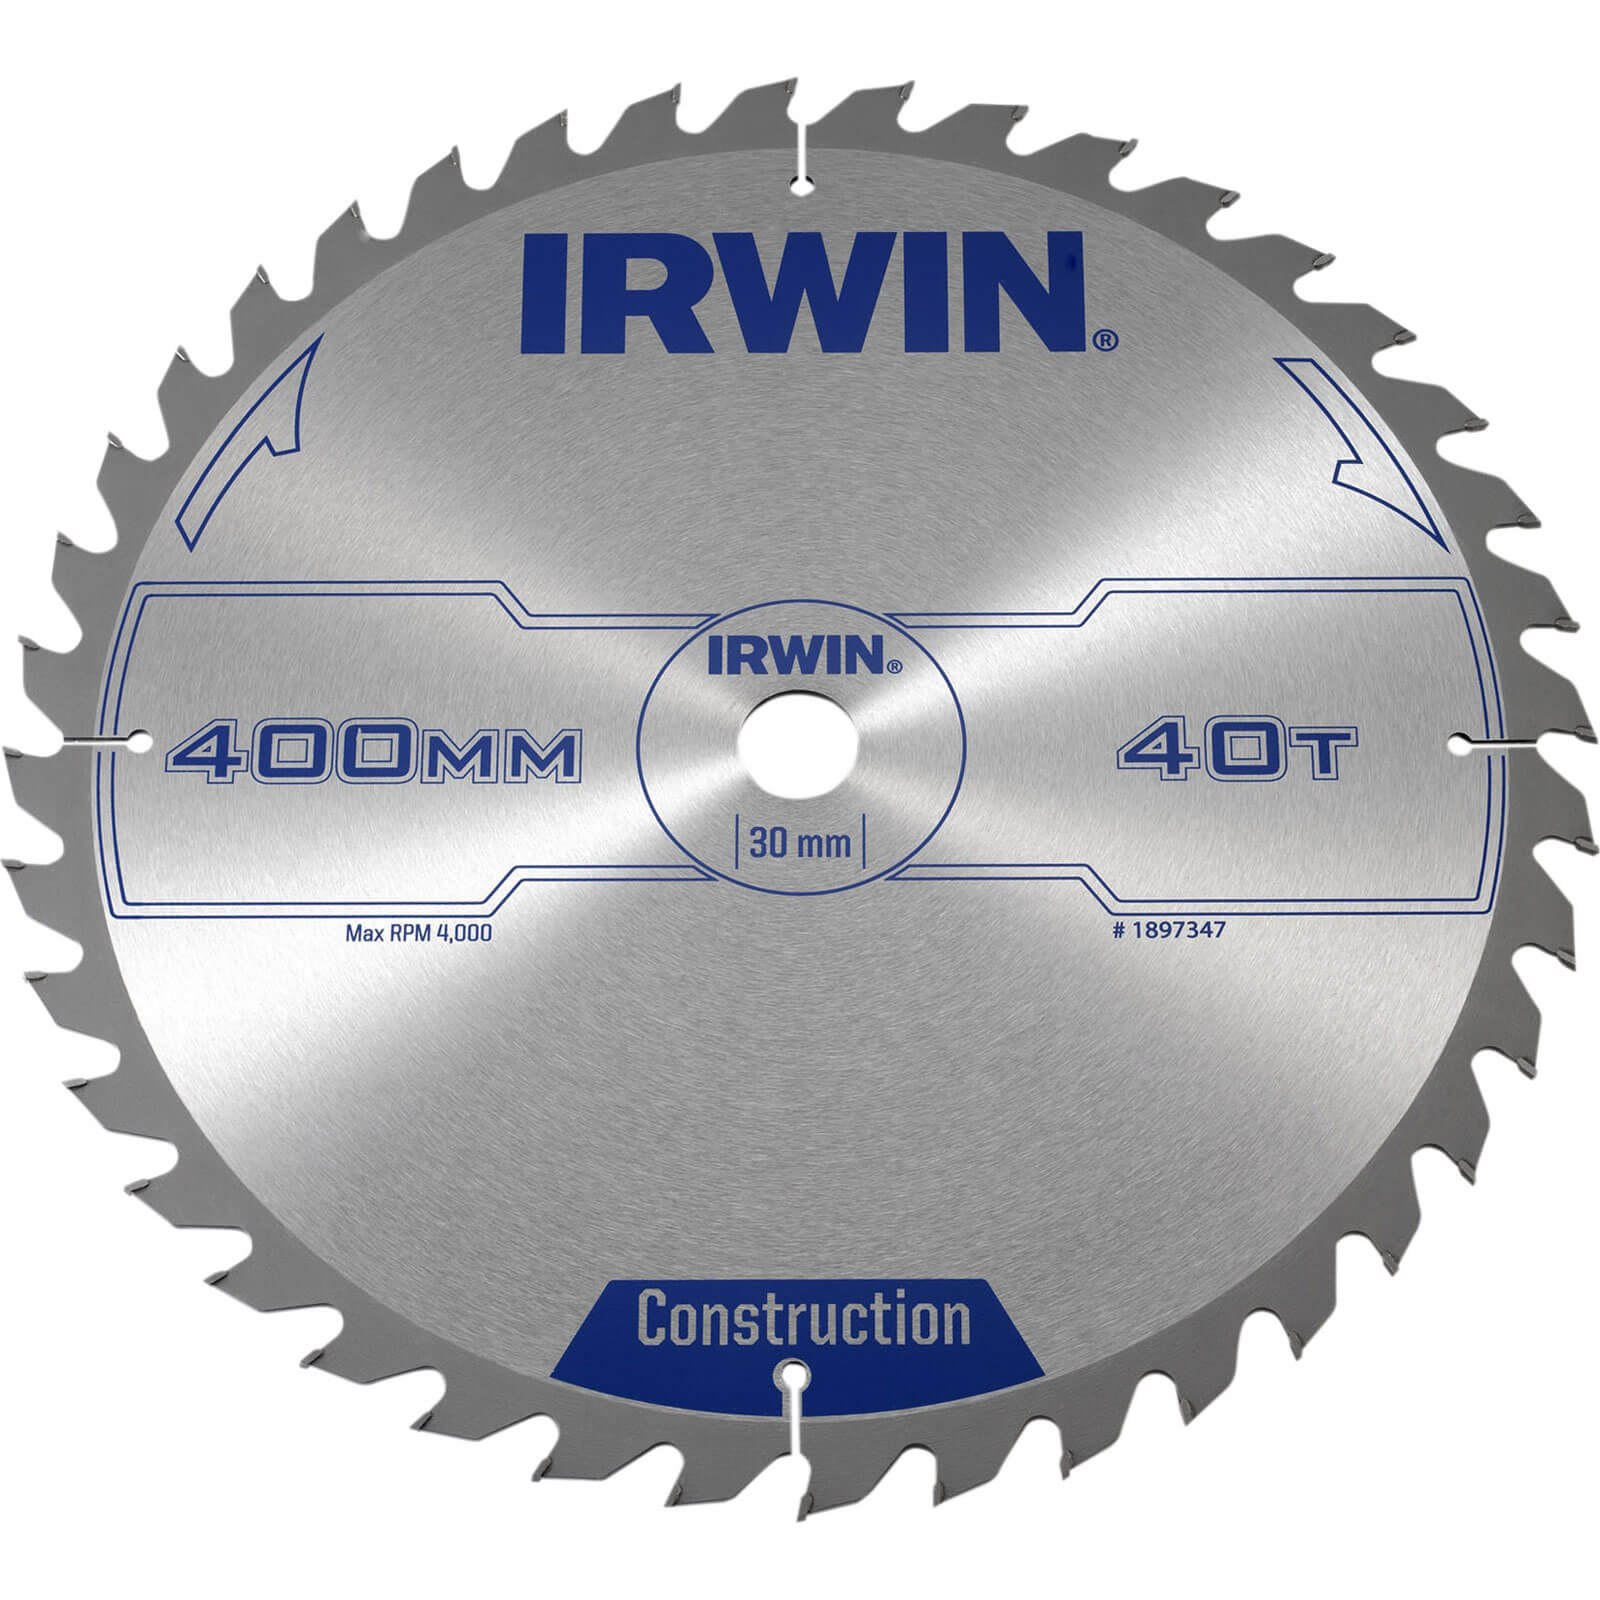 Photo of Irwin Atb Construction Circular Saw Blade 400mm 40t 30mm